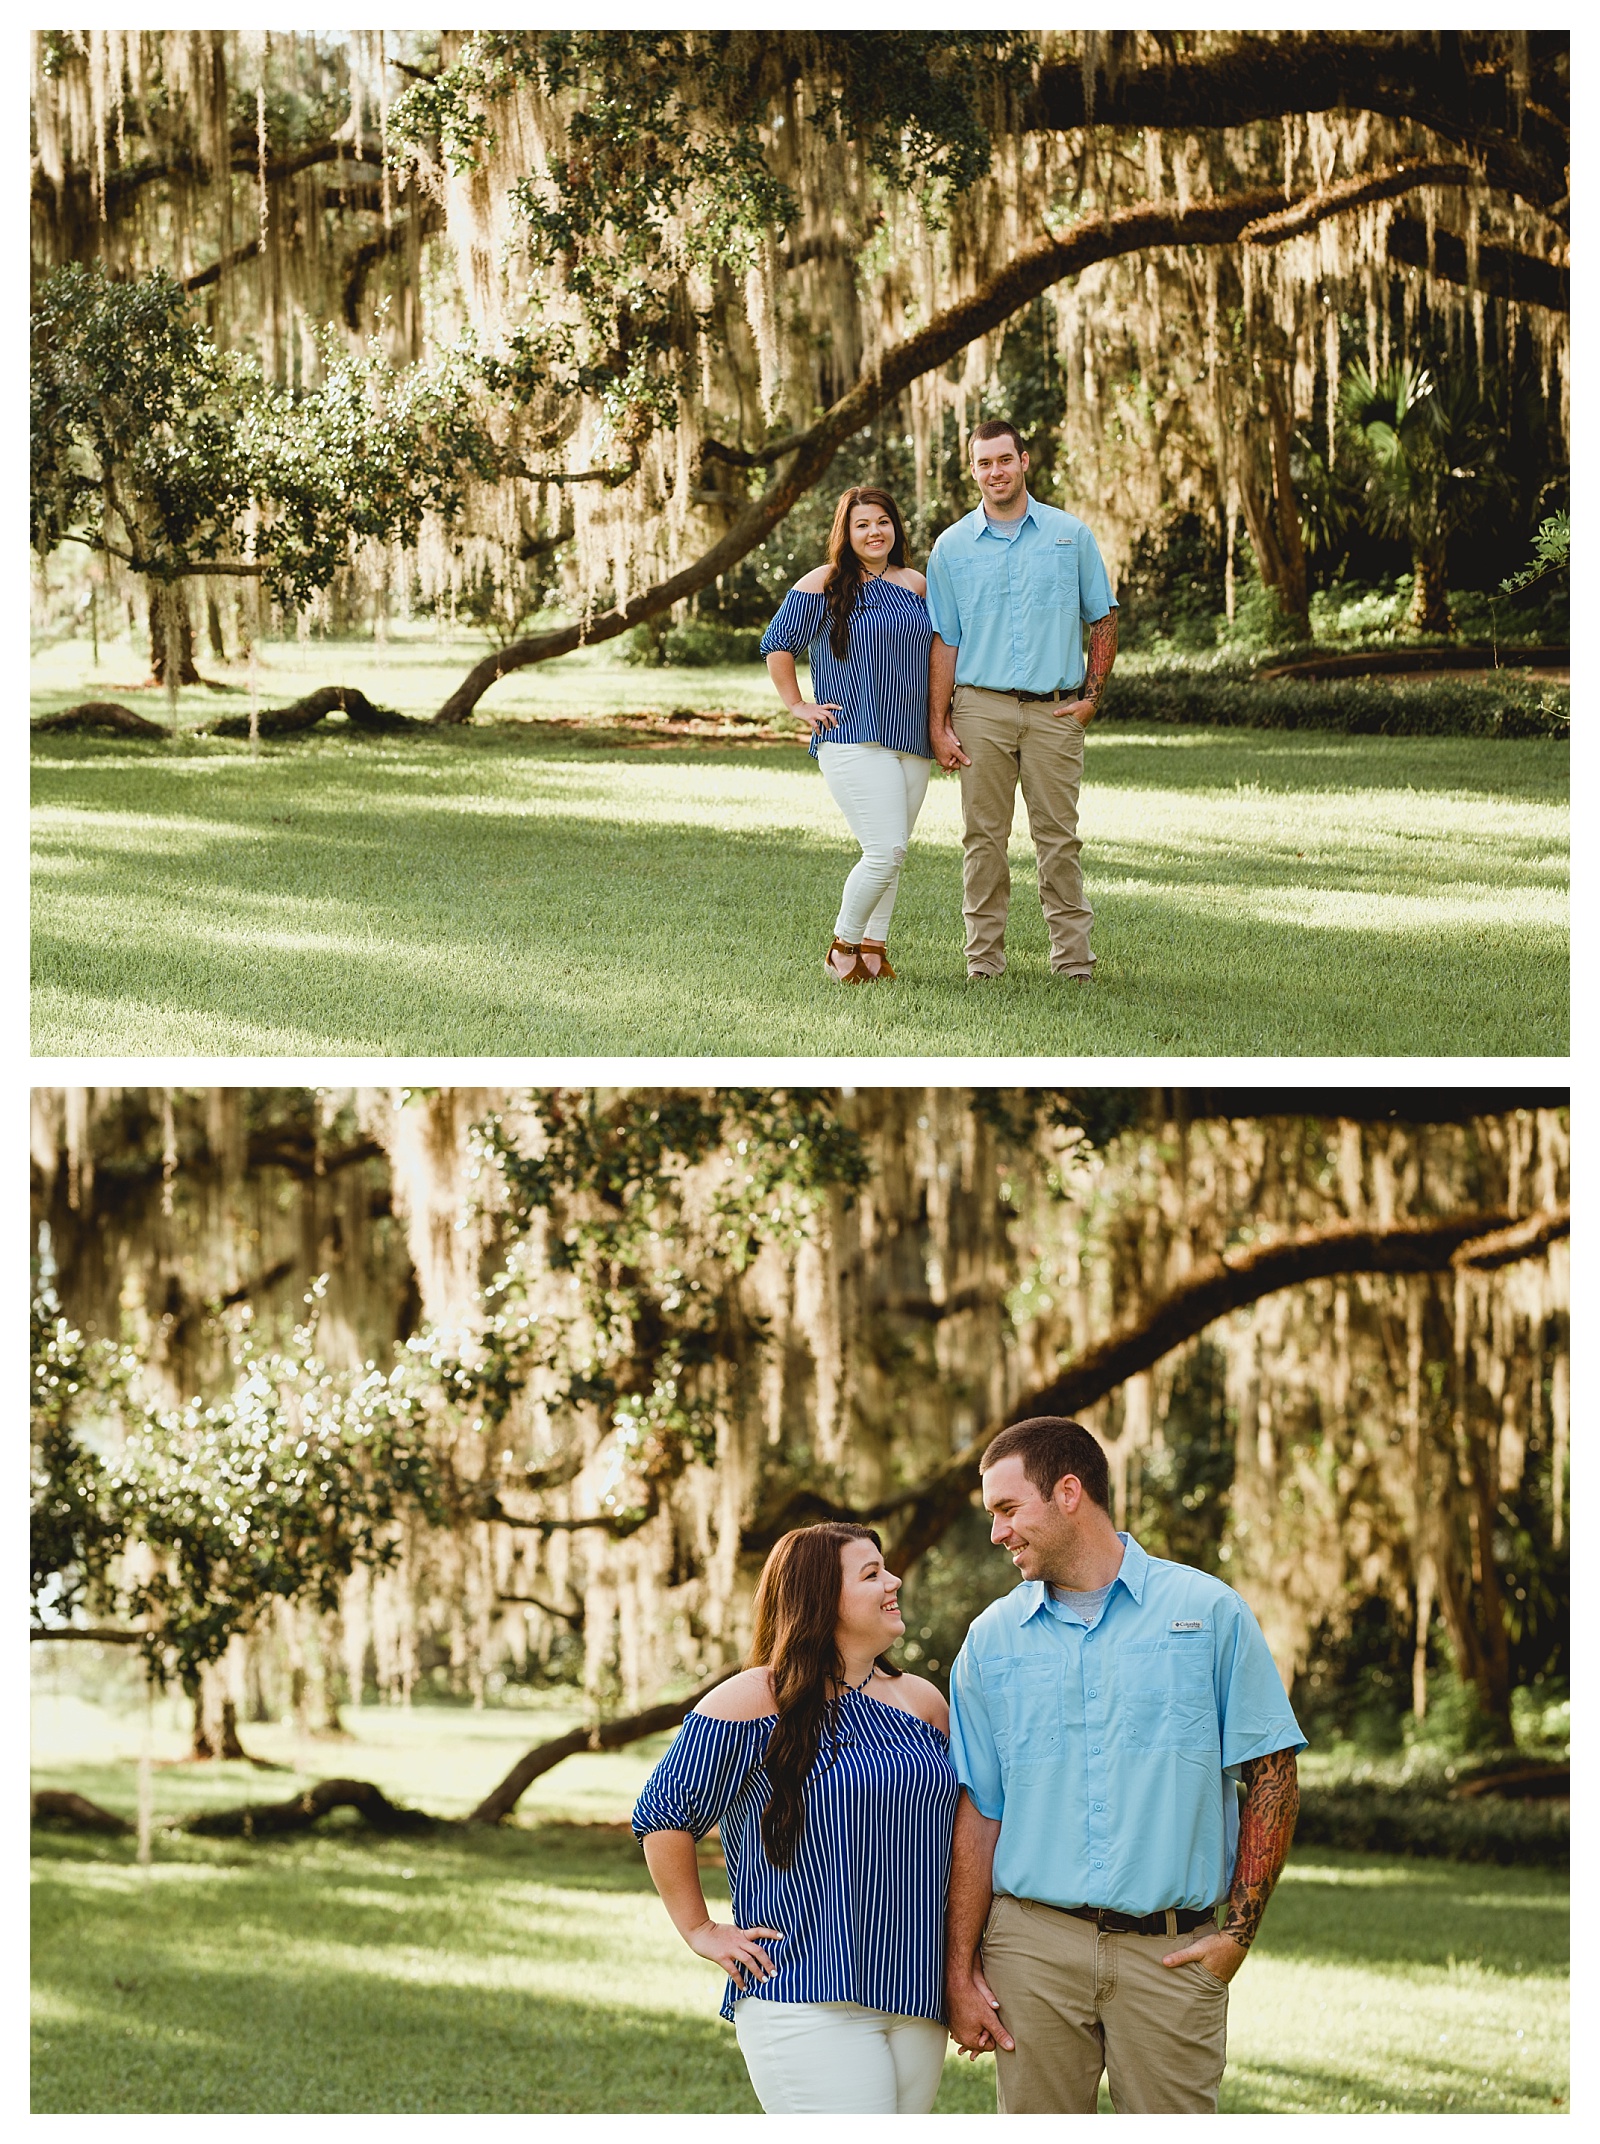 Tallahassee couple portraits for spring wedding. Shelly Williams Photography